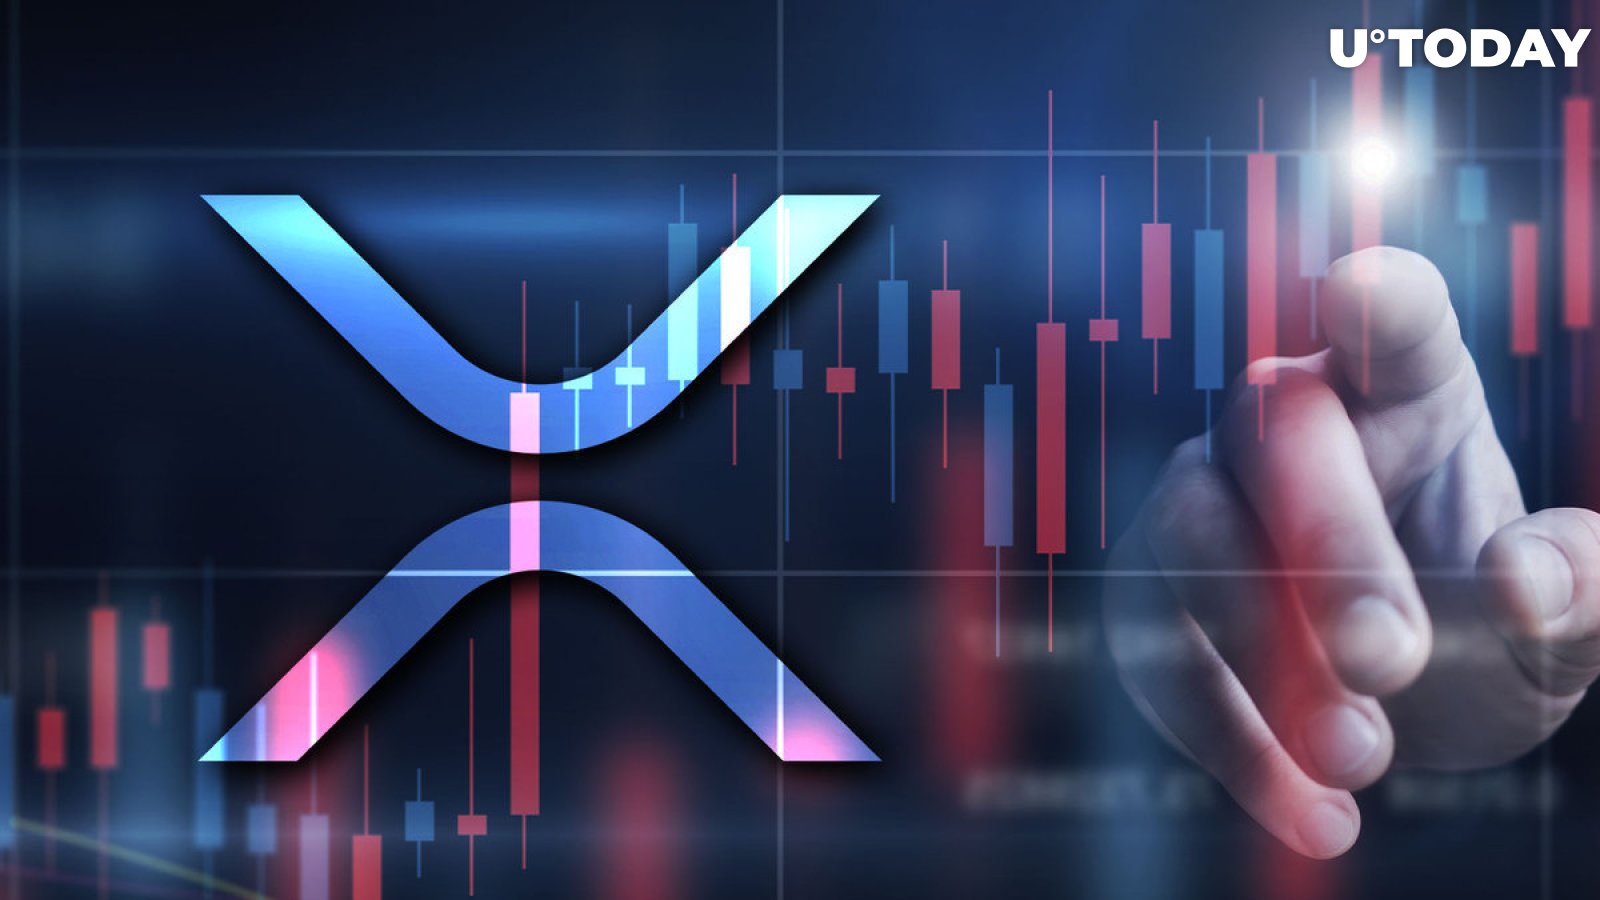 XRP Price Outlook Looks Bullish, But This Key Metric Needs to Be Revived